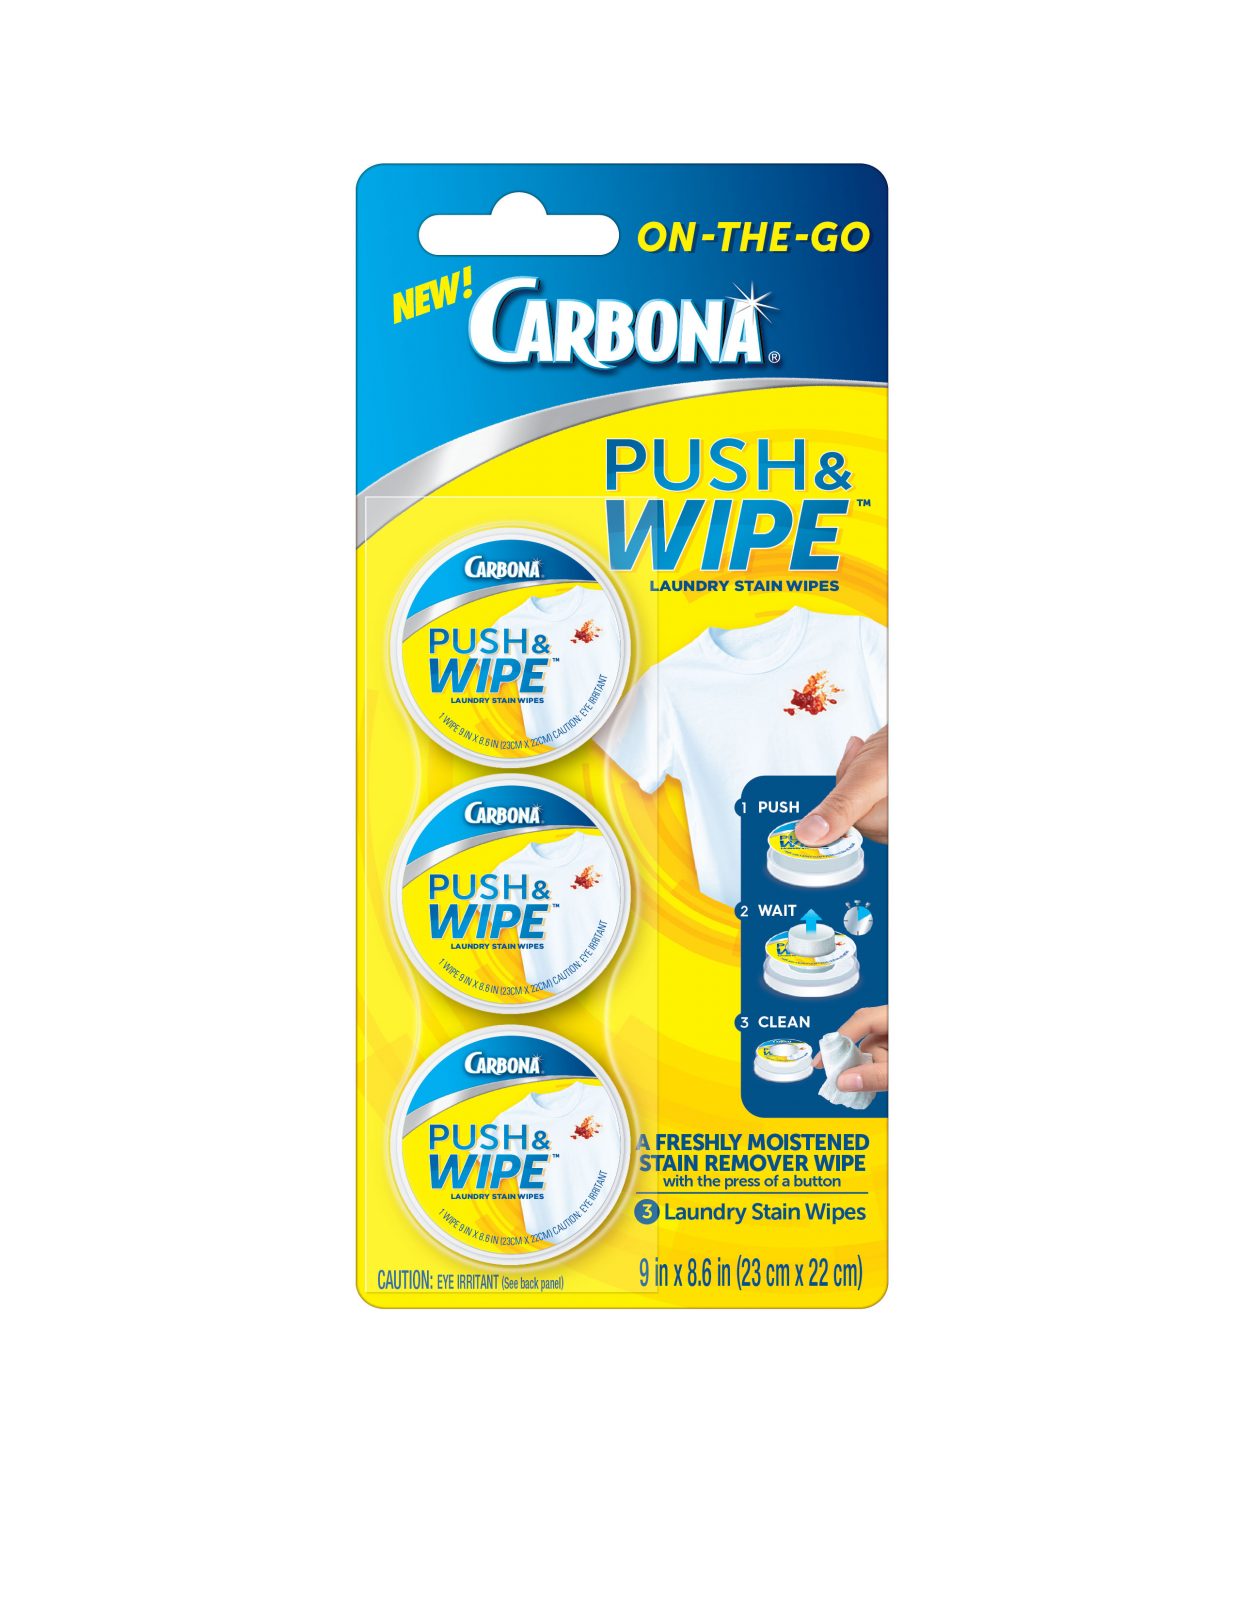 Carbona Silver Wipes | Metal Cleaner & Polish | 12 Wipes, 2 Pack